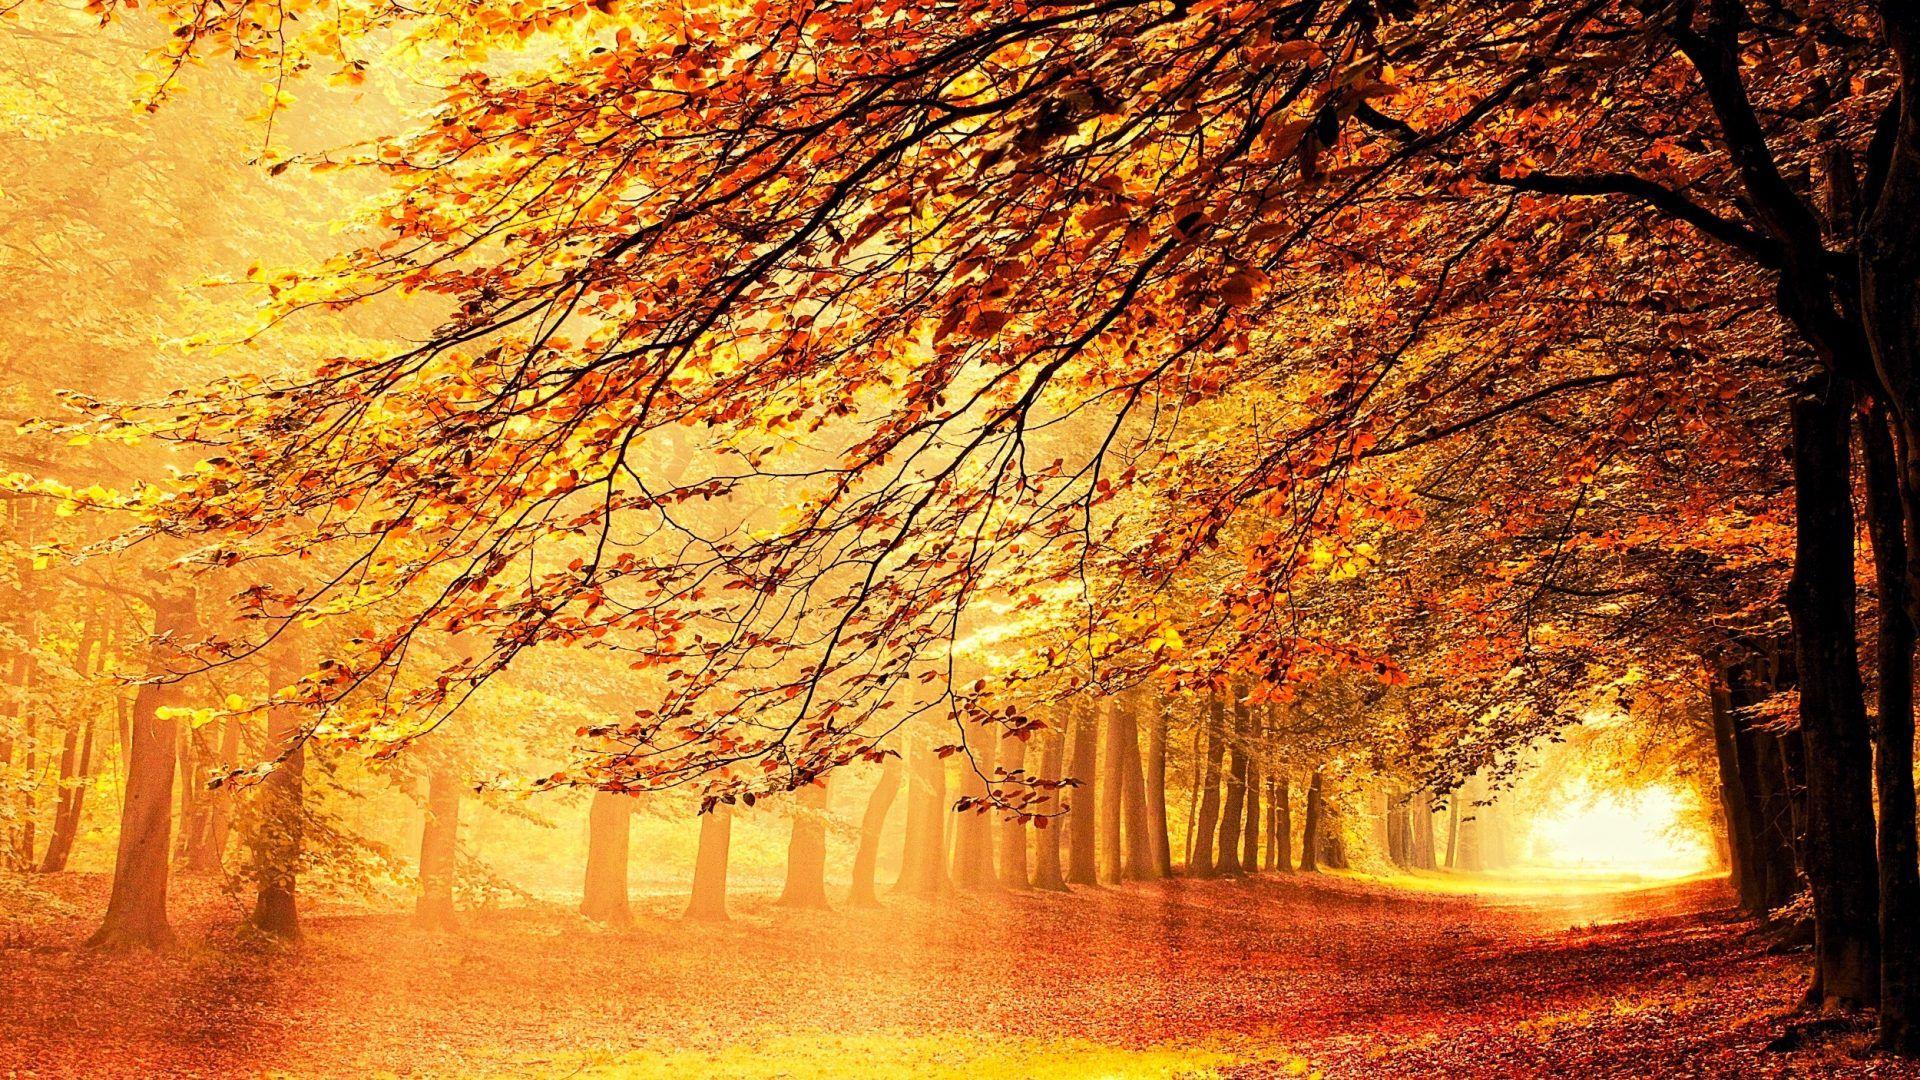 October Scenery Wallpapers - Top Free October Scenery Backgrounds ...